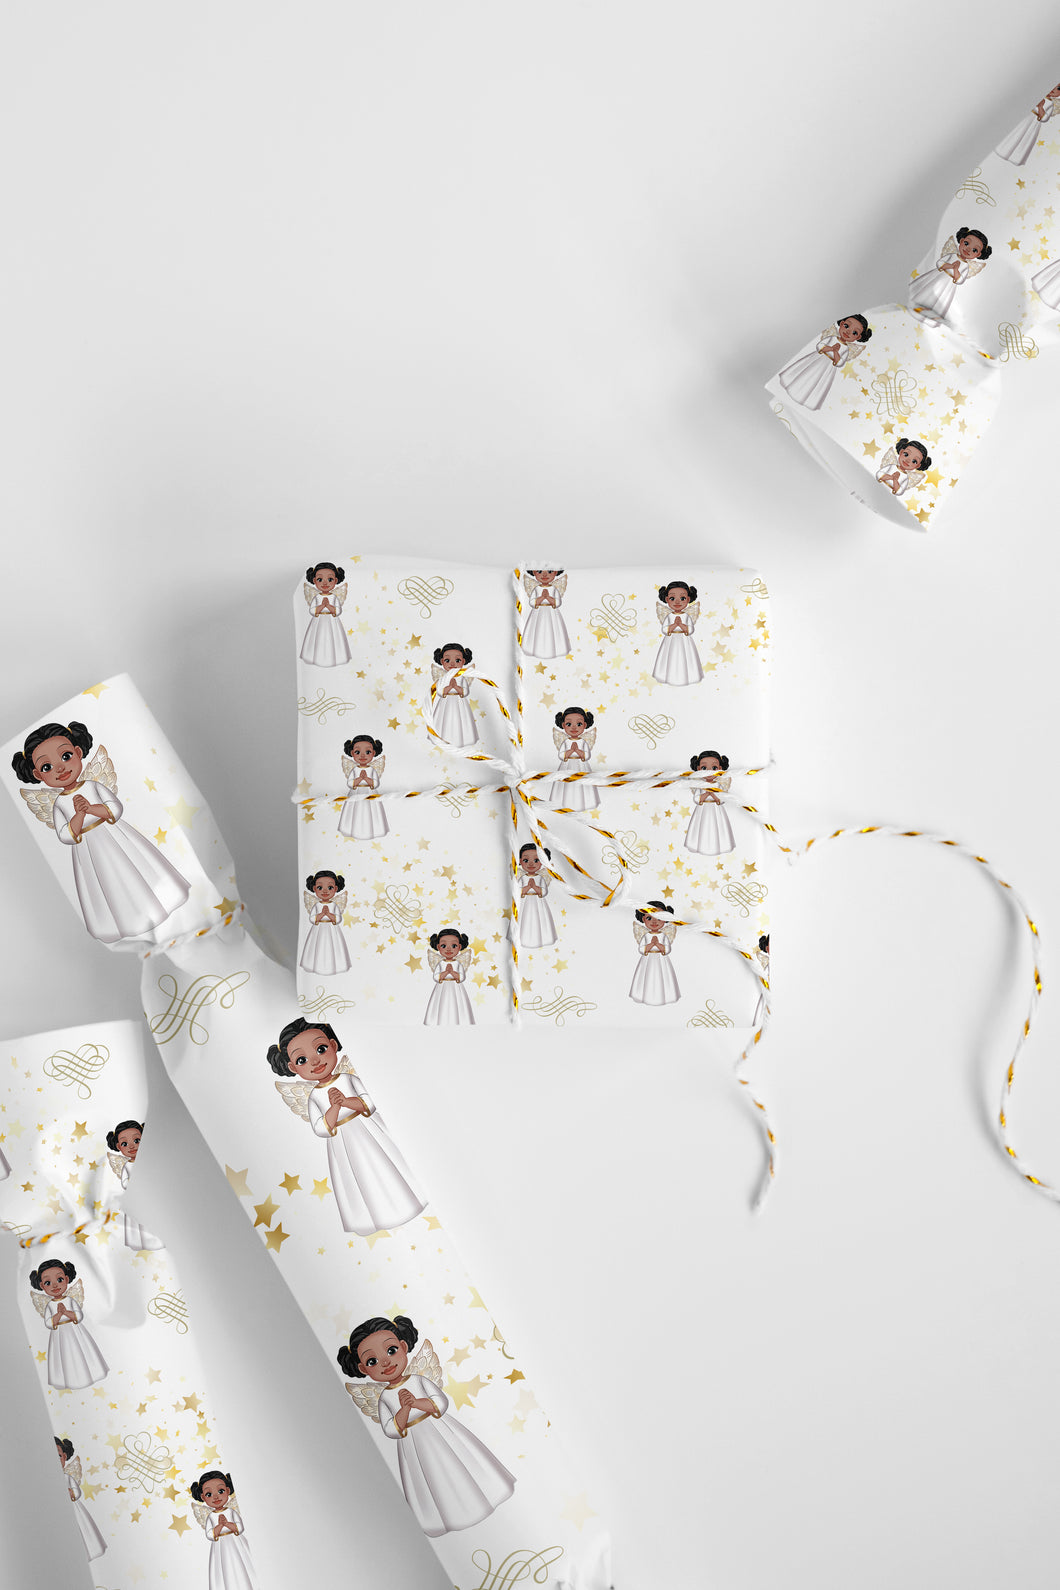 Black Angel Remix 2 Wrapping Paper Roll